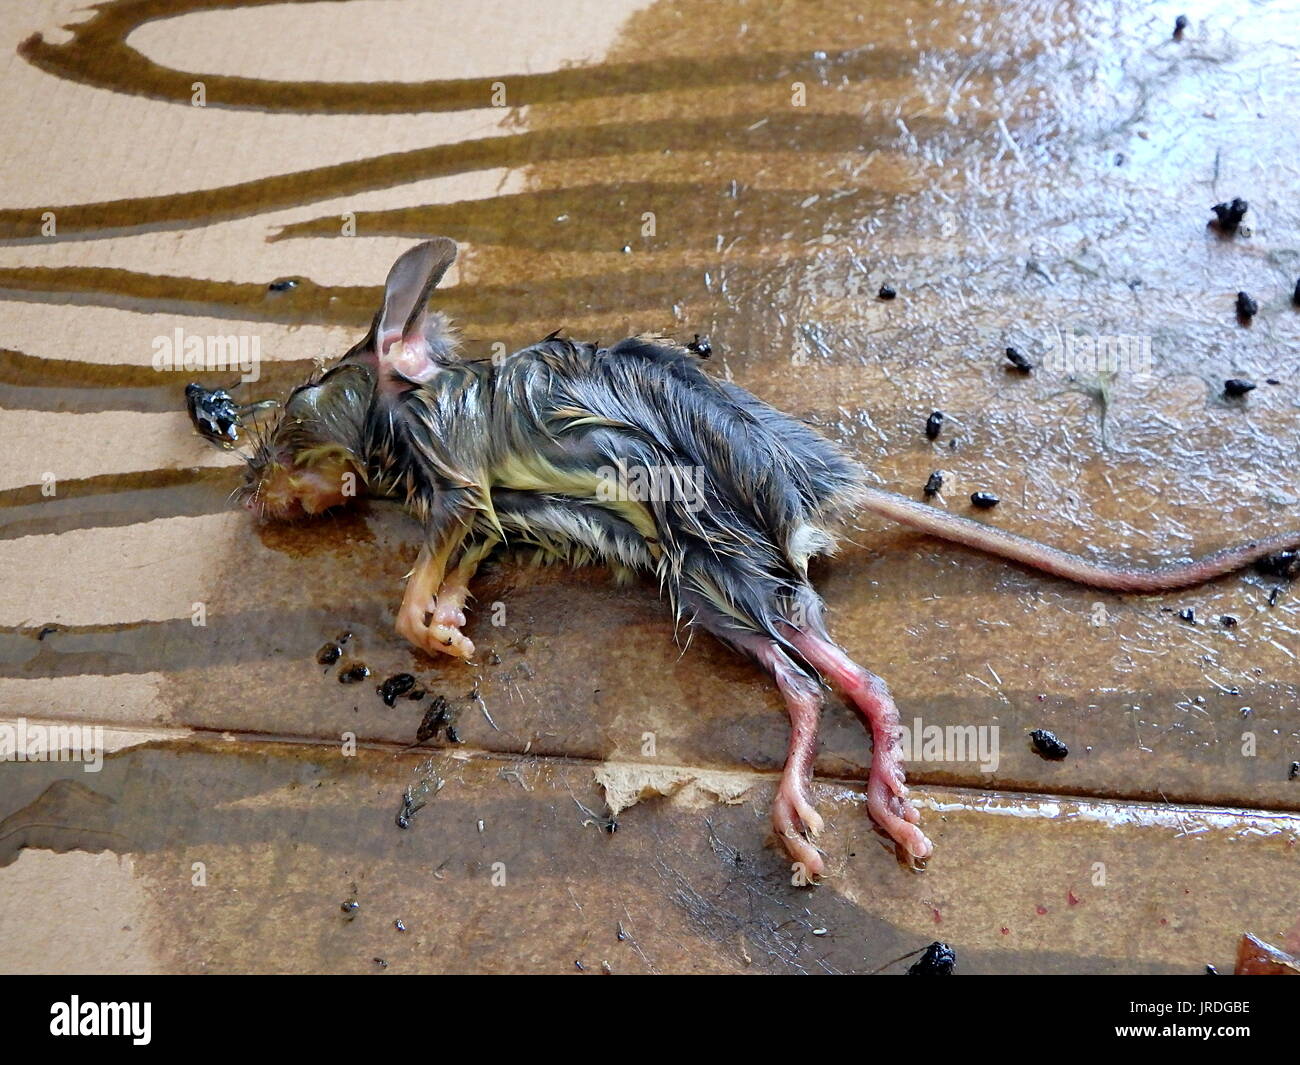 https://c8.alamy.com/comp/JRDGBE/mouse-in-trap-dead-little-mouse-on-glue-trapped-JRDGBE.jpg